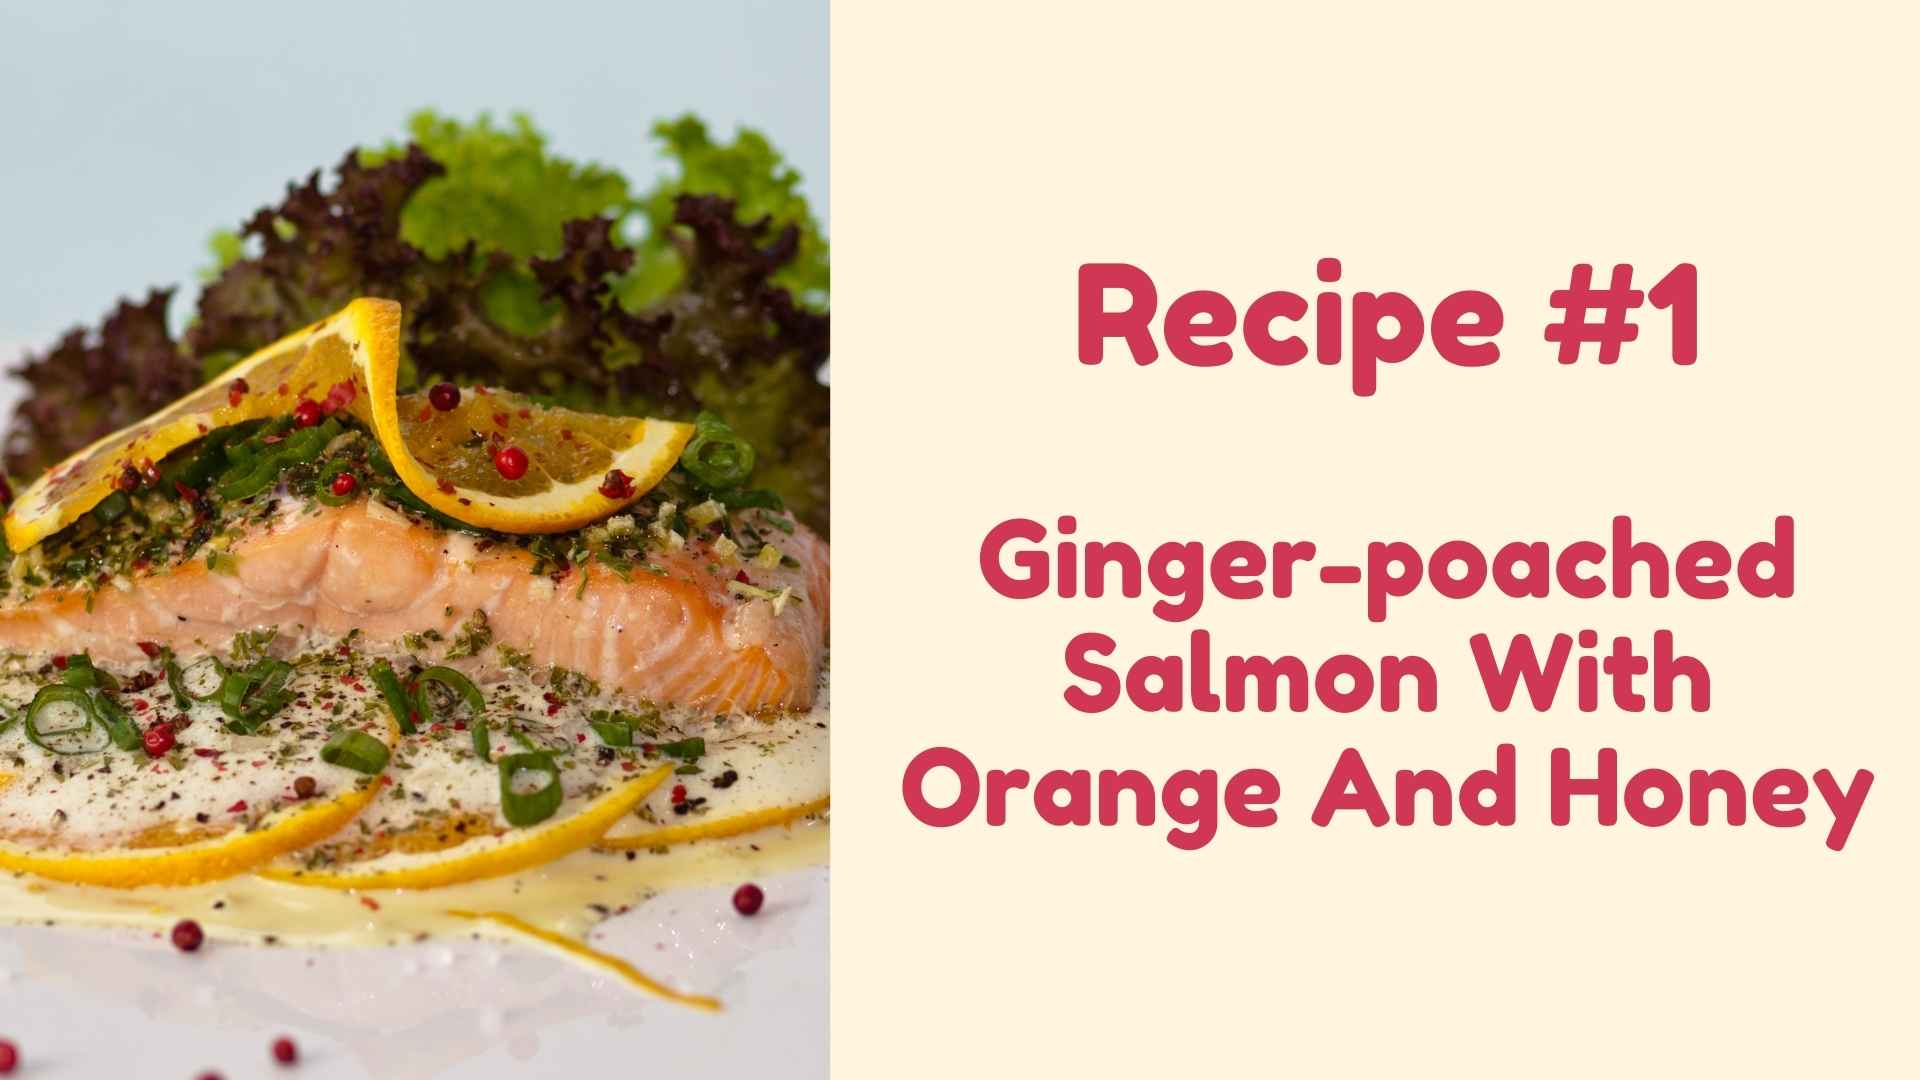 ginger-poached salmon with orange and honey